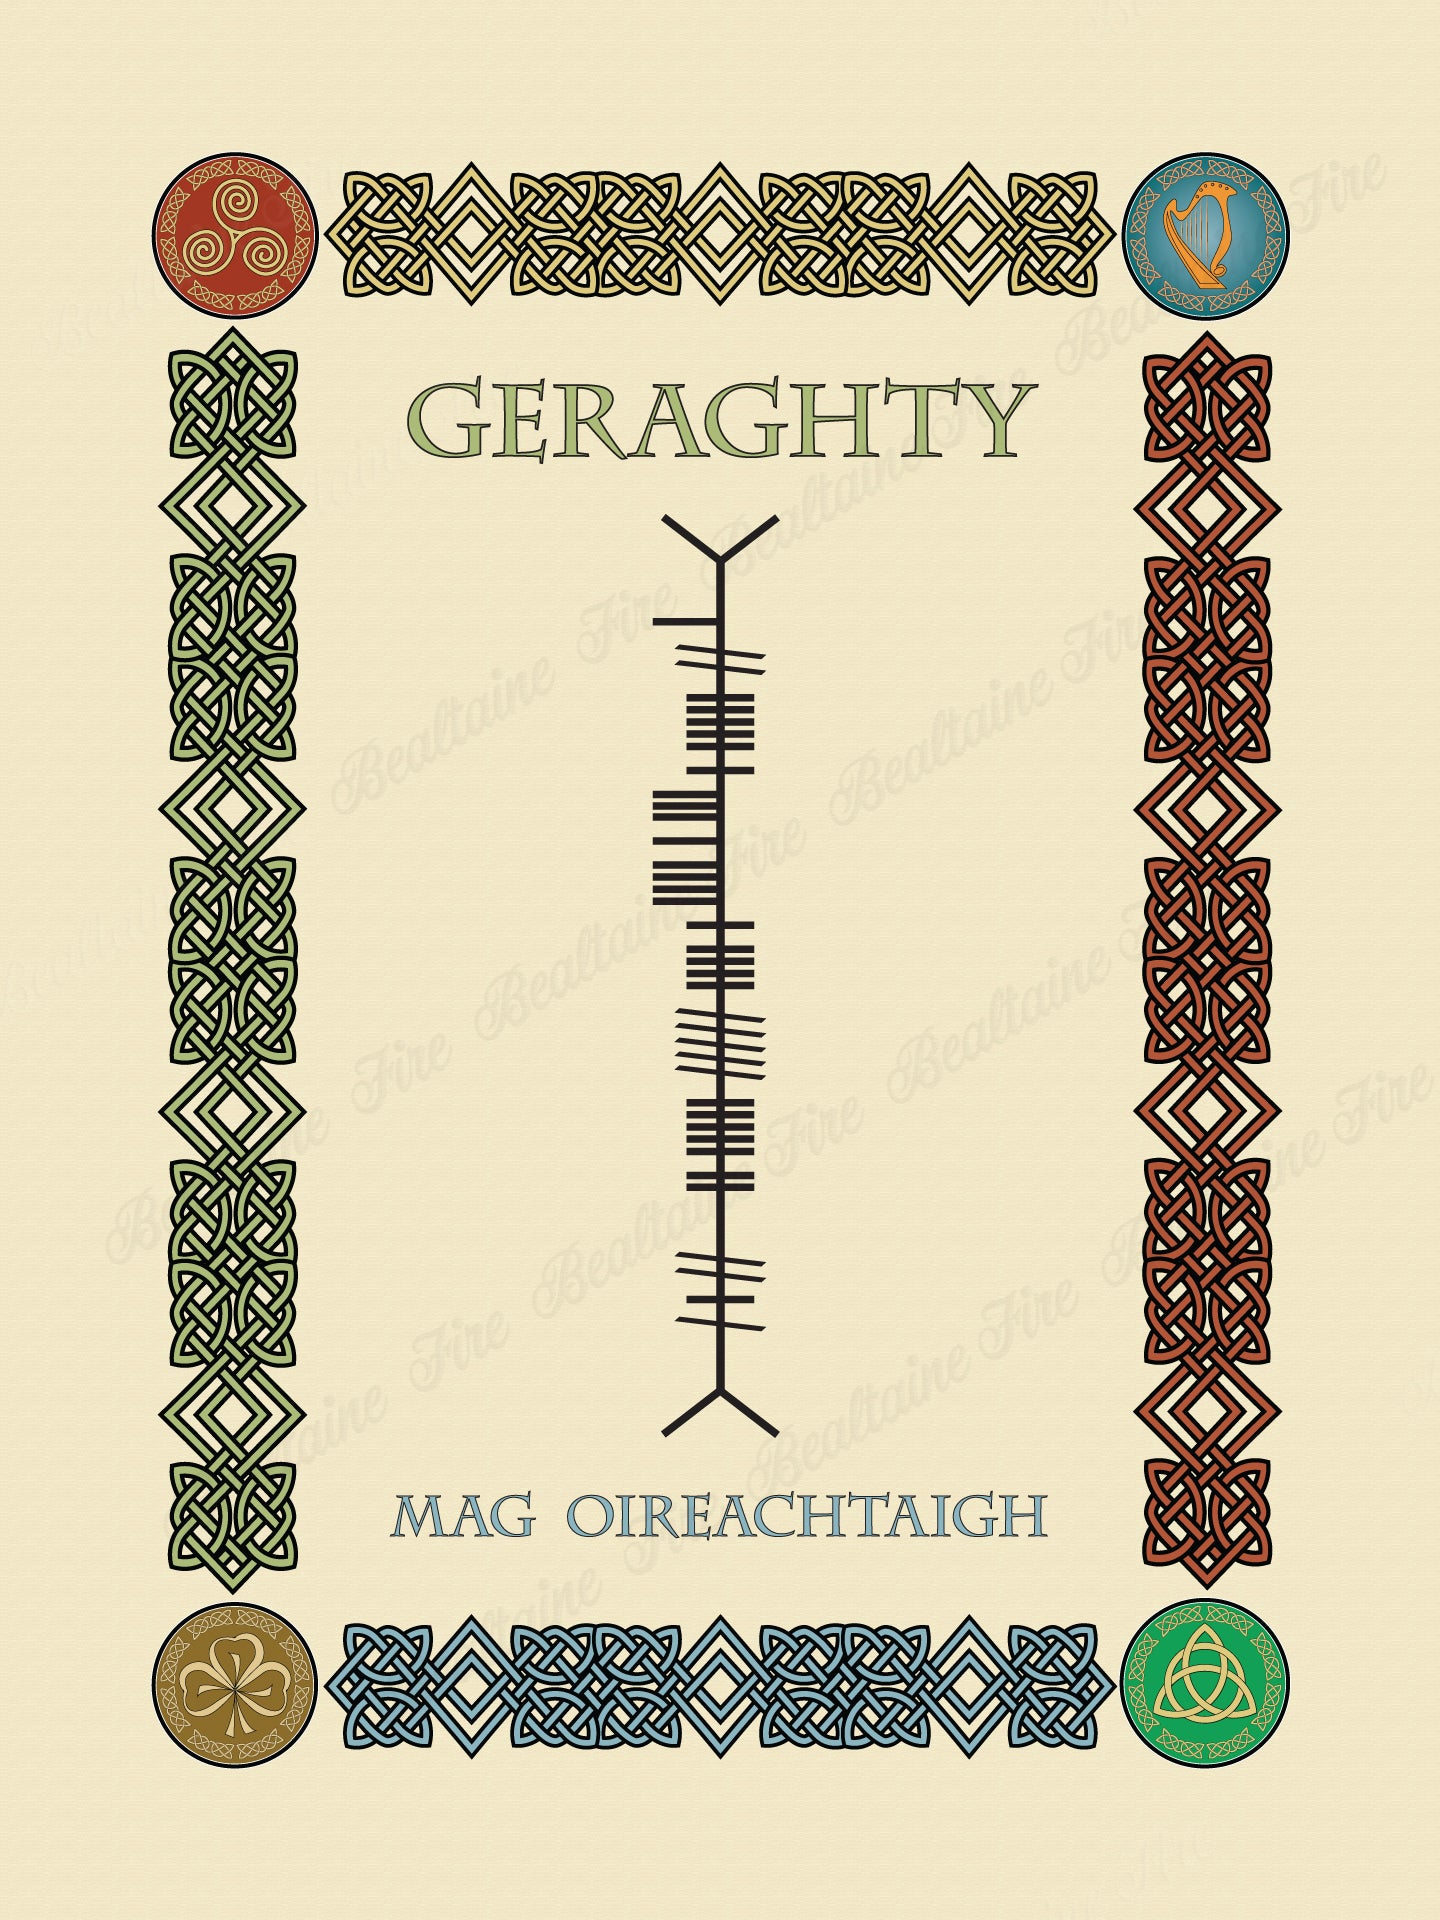 Geraghty in Old Irish and Ogham - PDF Download